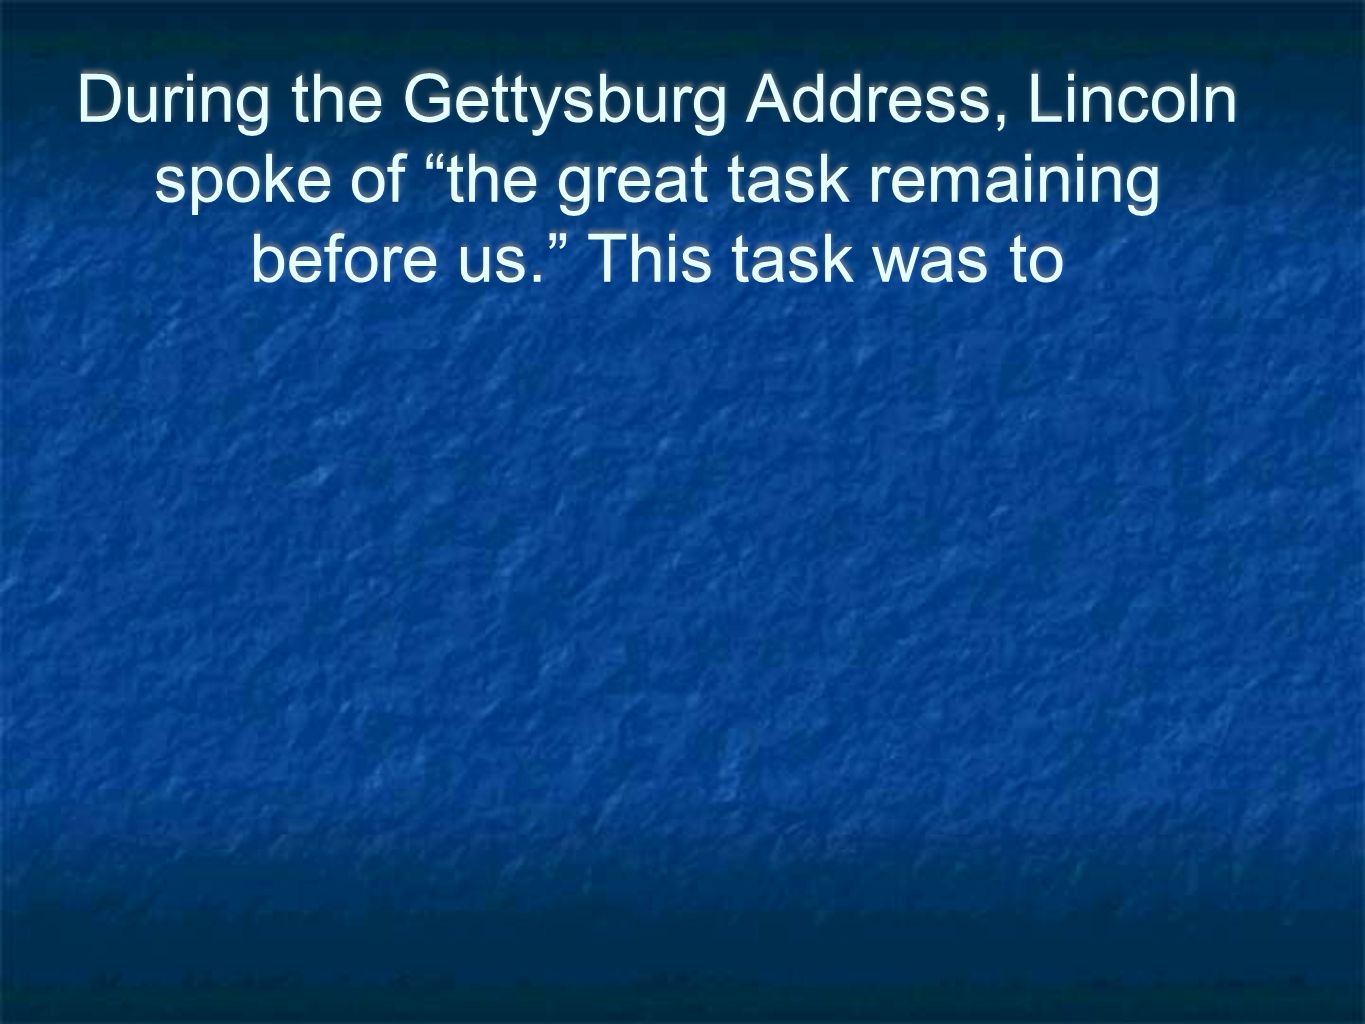 During the Gettysburg Address, Lincoln spoke of the great task remaining before us. This task was to